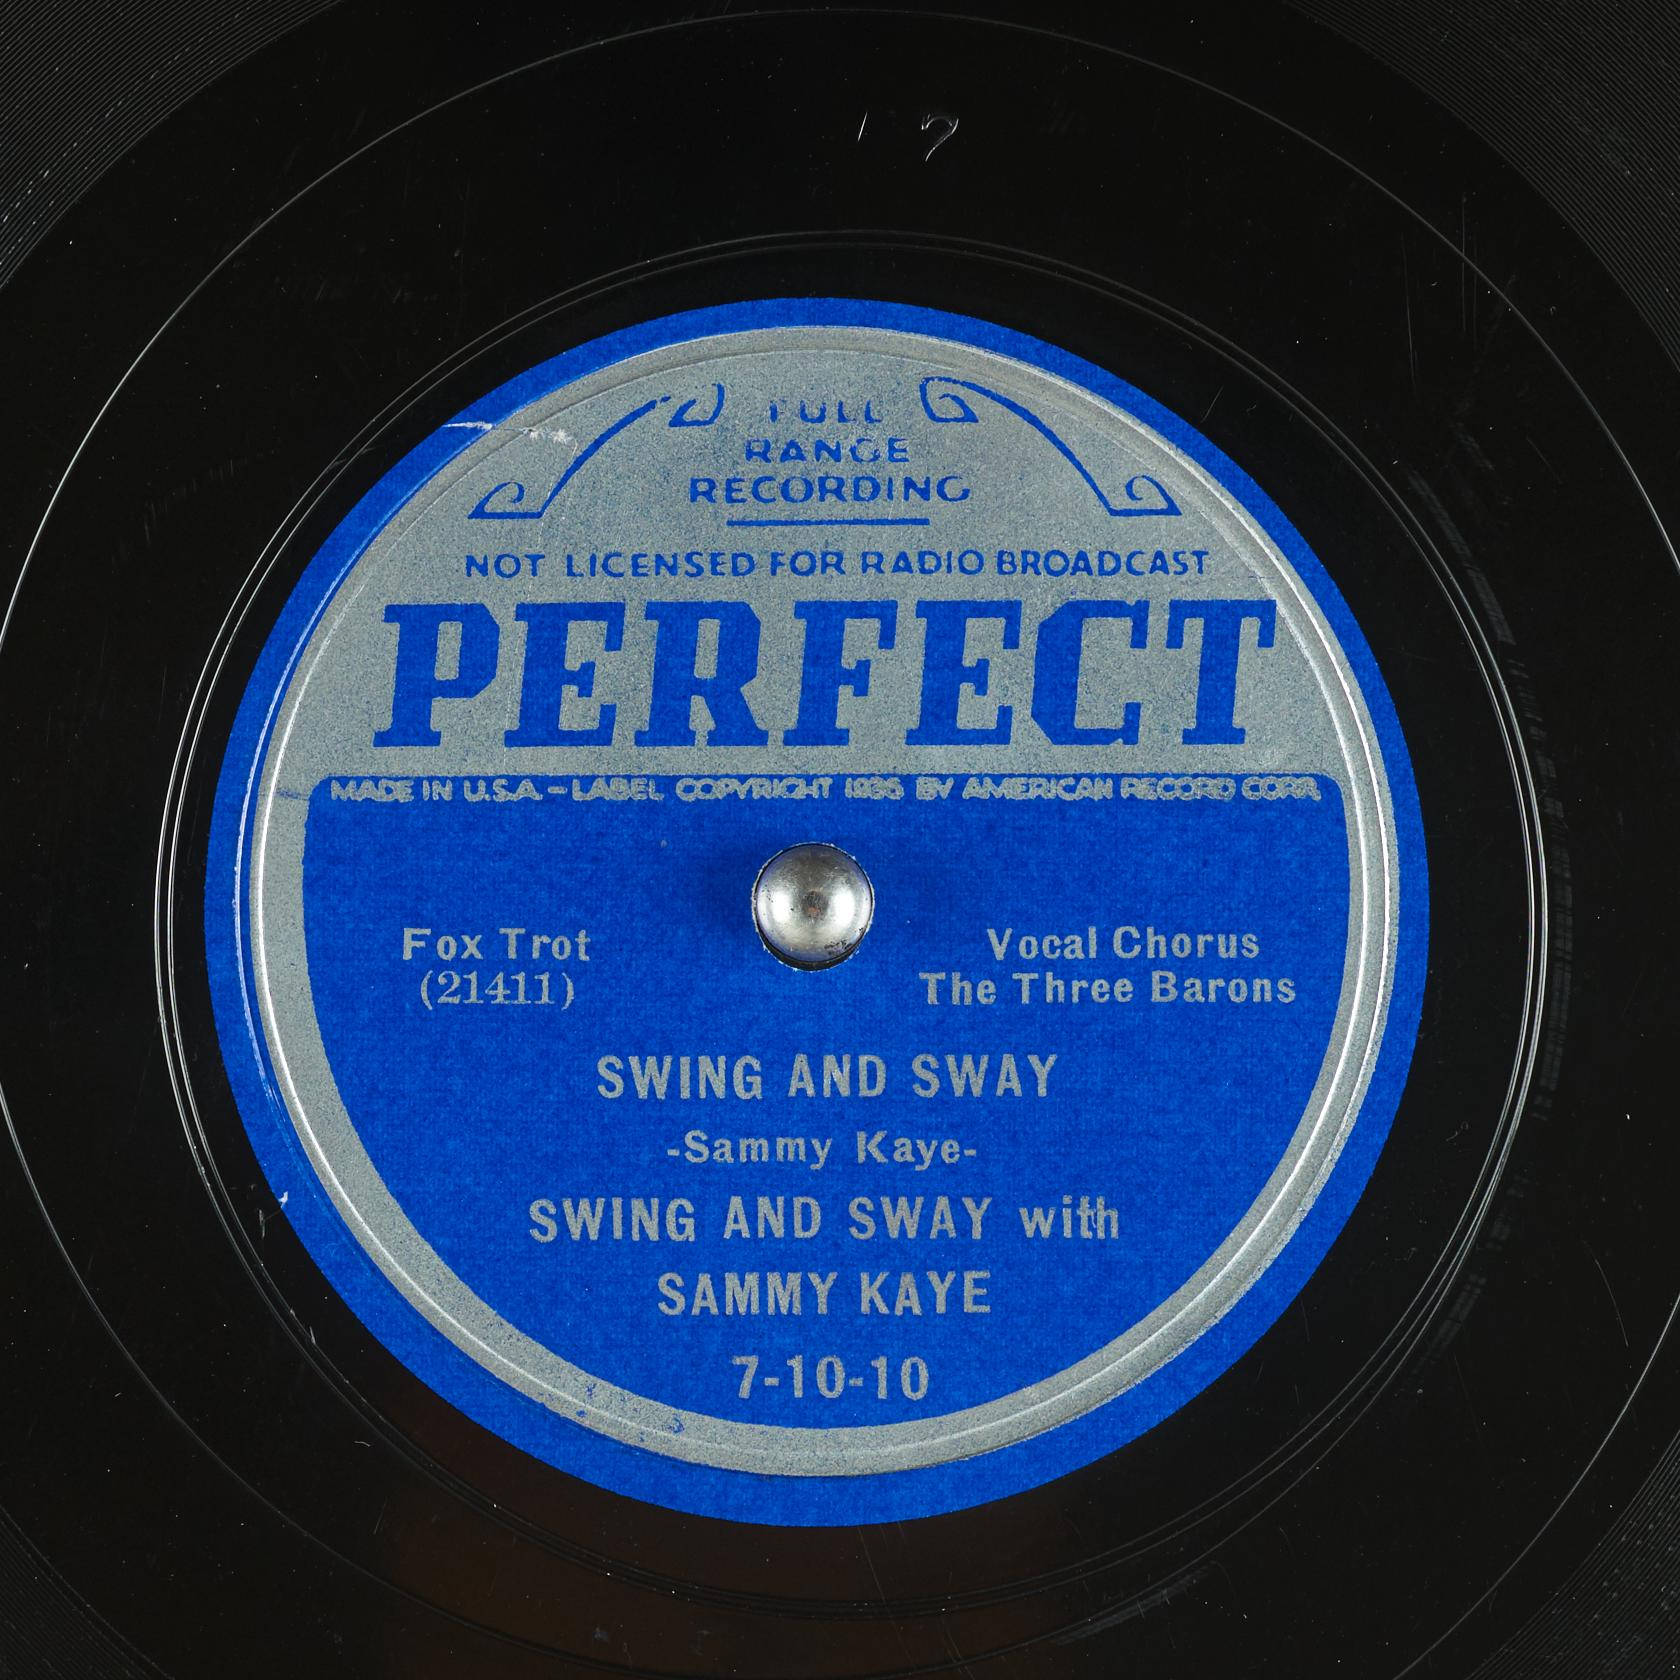 Vintage Vinyl Record "Swing and Sway" by Sammy Kaye Wallpaper